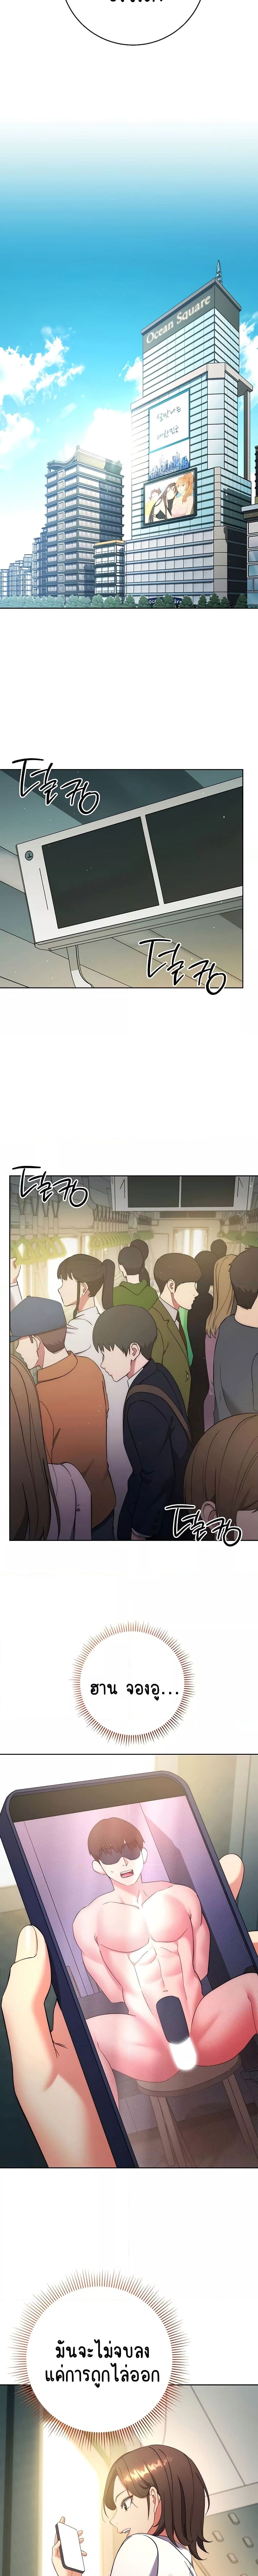 Outsider: The Invisible Man ตอนที่ 9 ภาพ 7